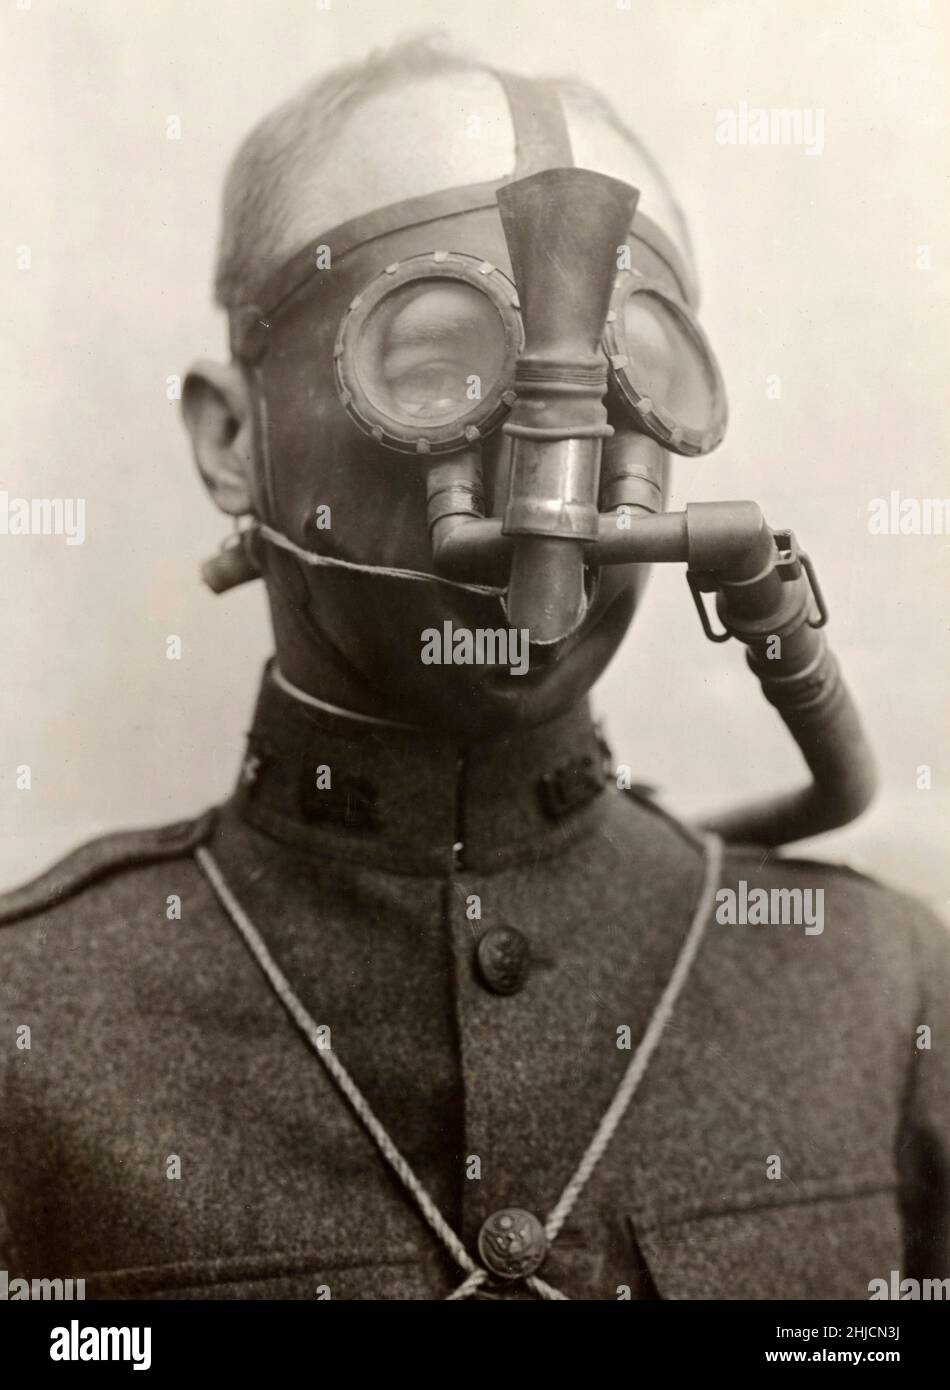 Tissot-type French gas mask from the First World War, 1918. Stock Photo